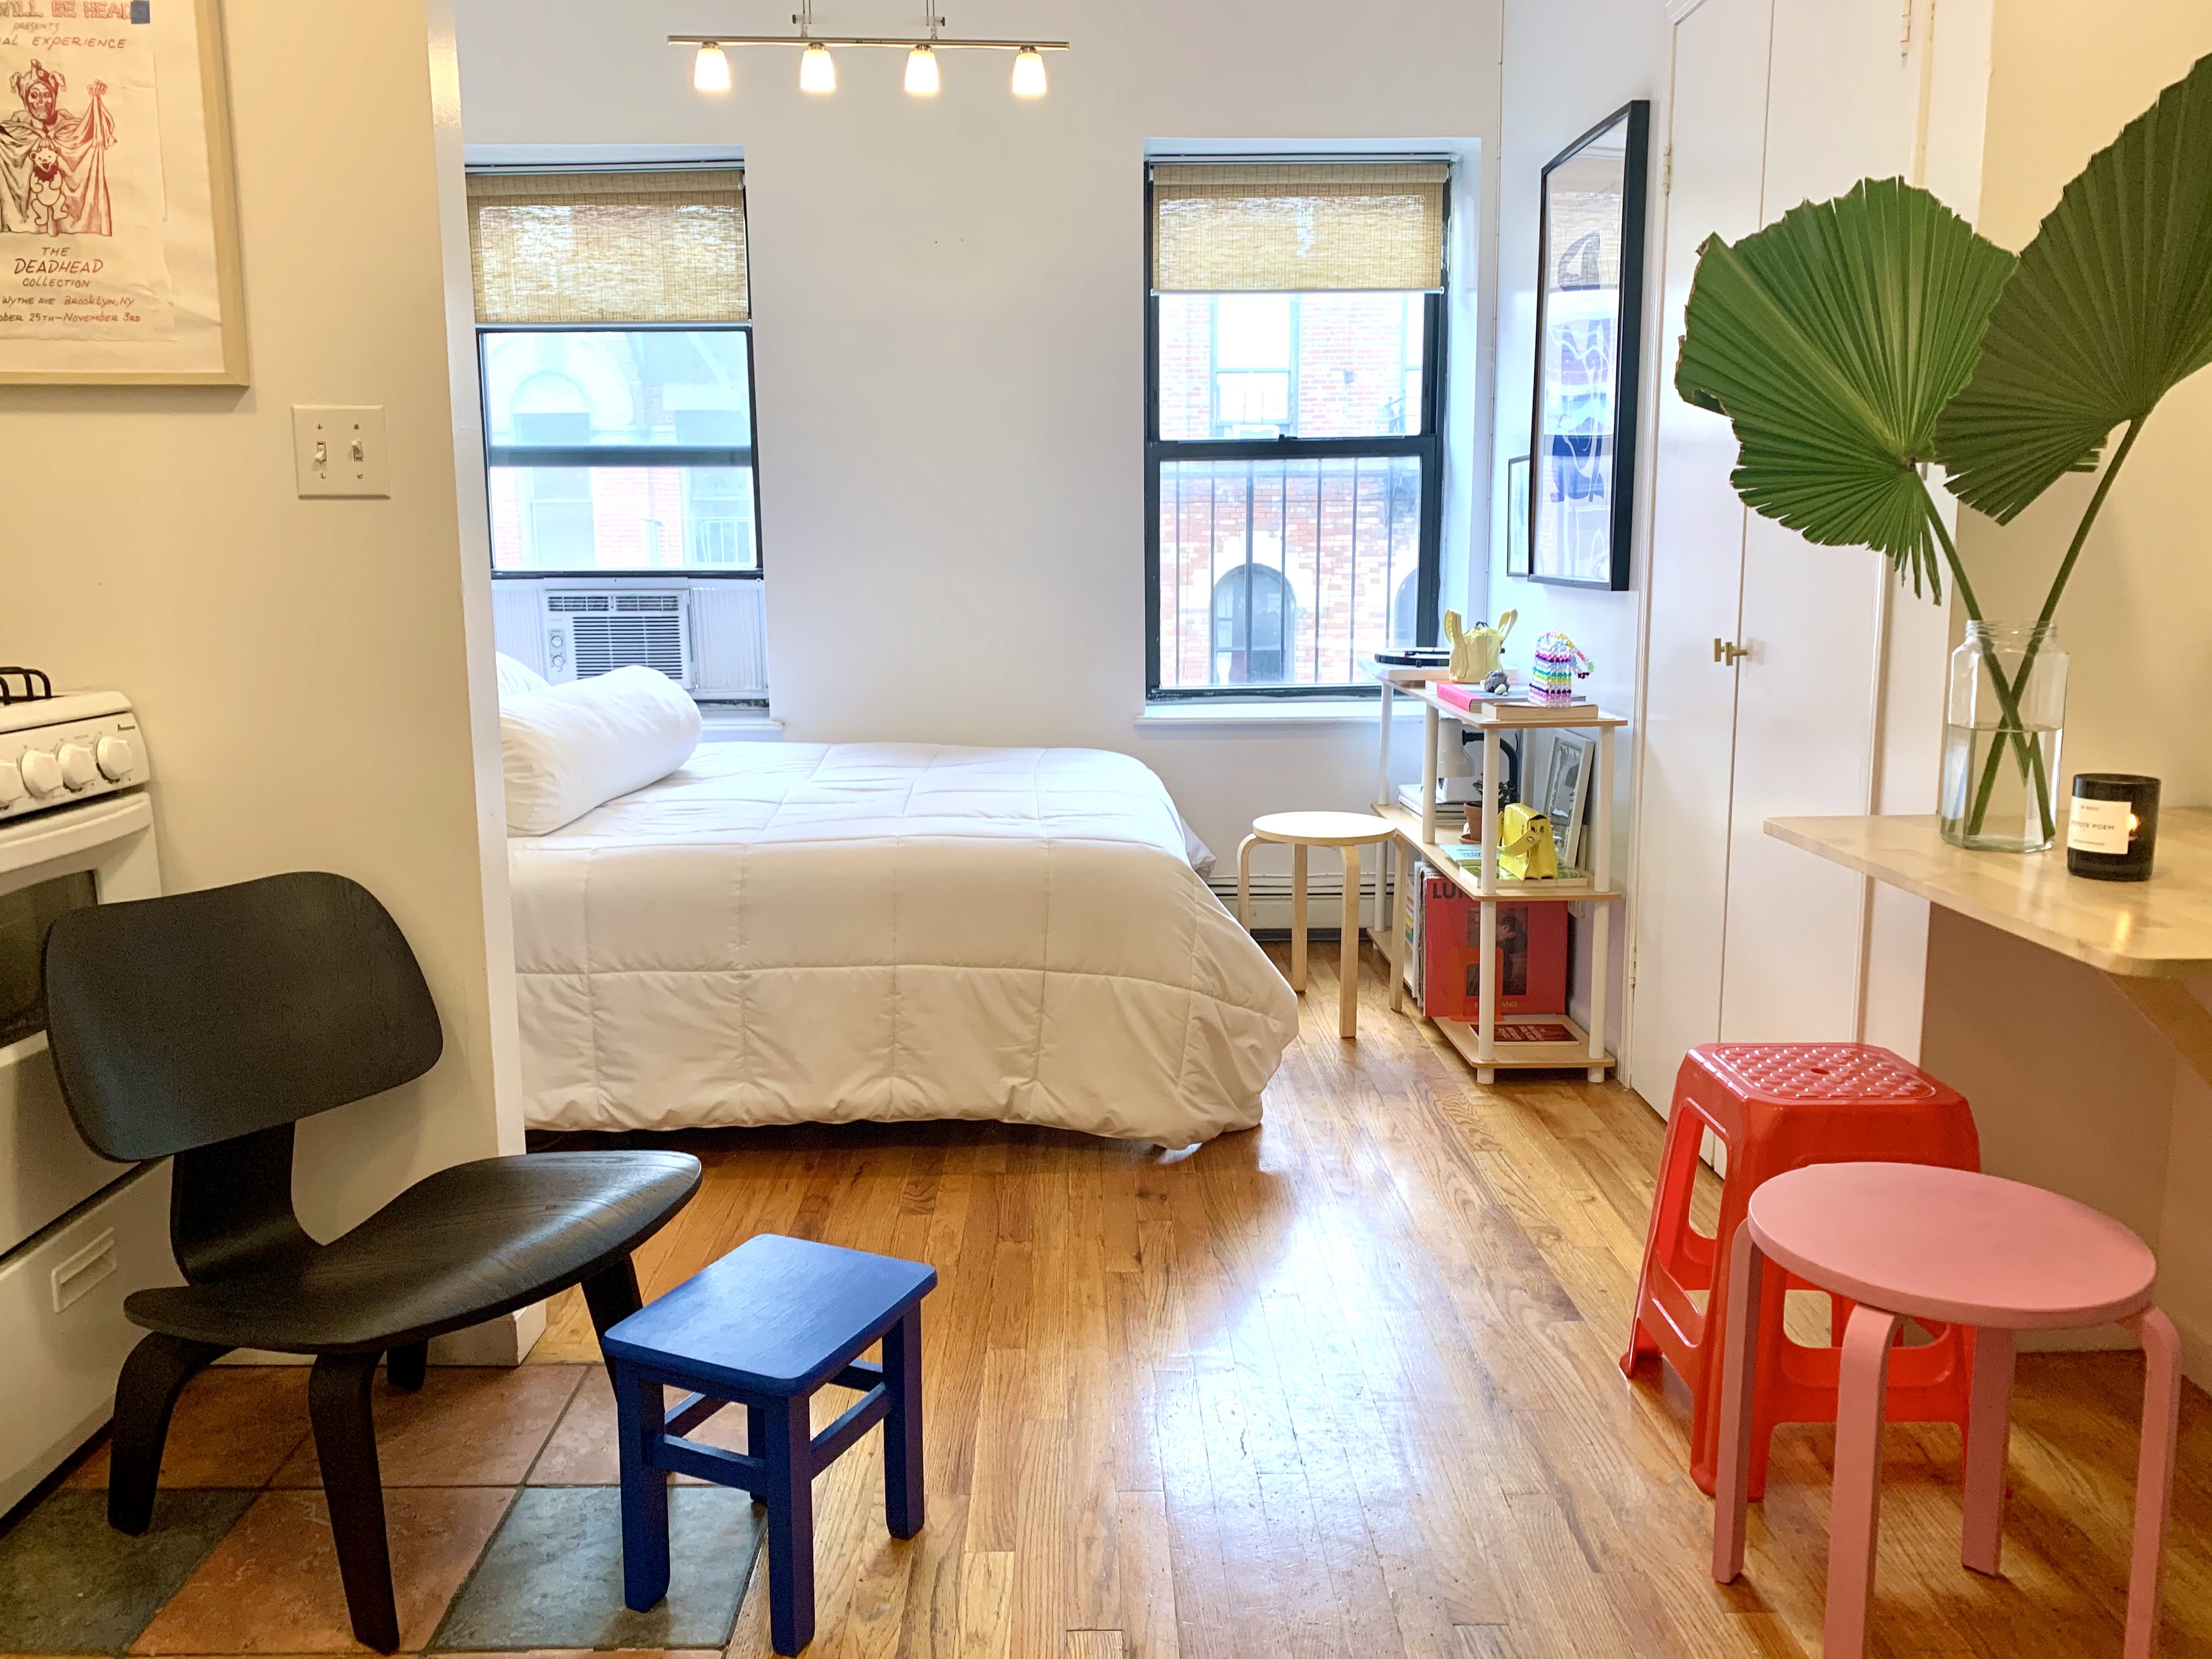 180-Square-Foot NYC Studio Photos | Apartment Therapy